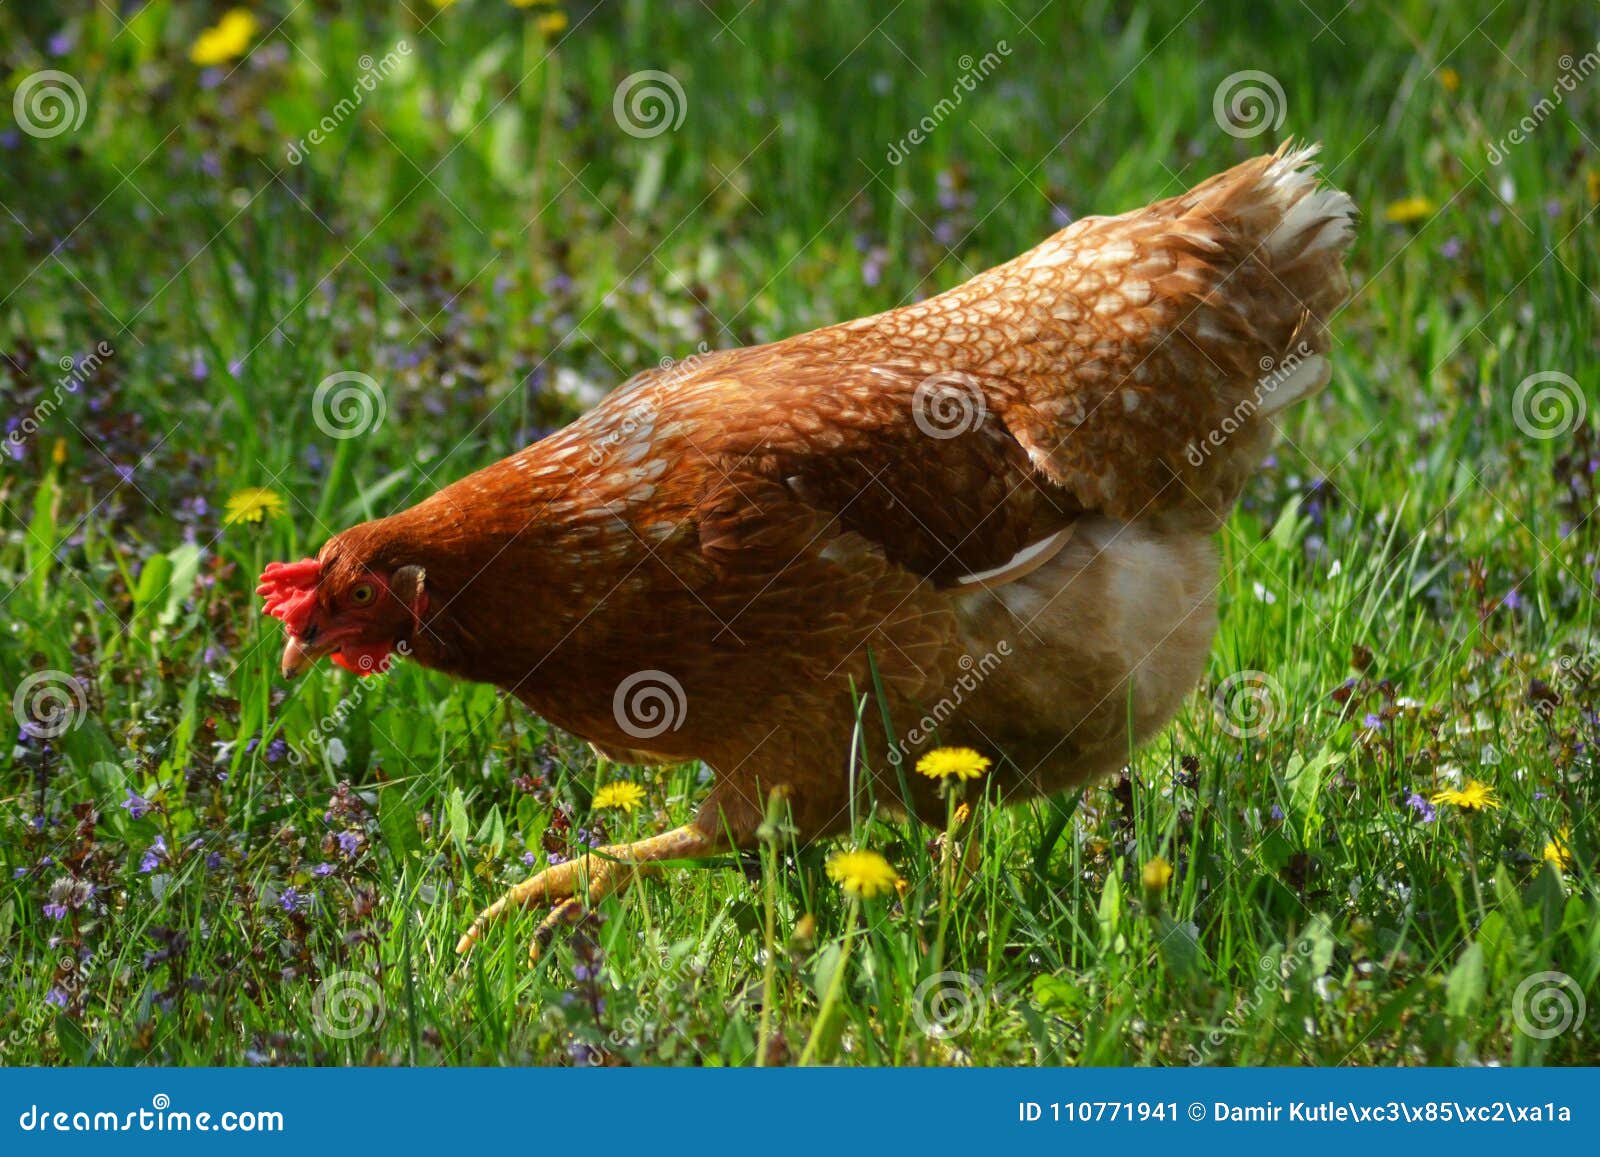 Red Chicken Chopper in the Grass Stock Image - Image of animal, domestic:  110771941